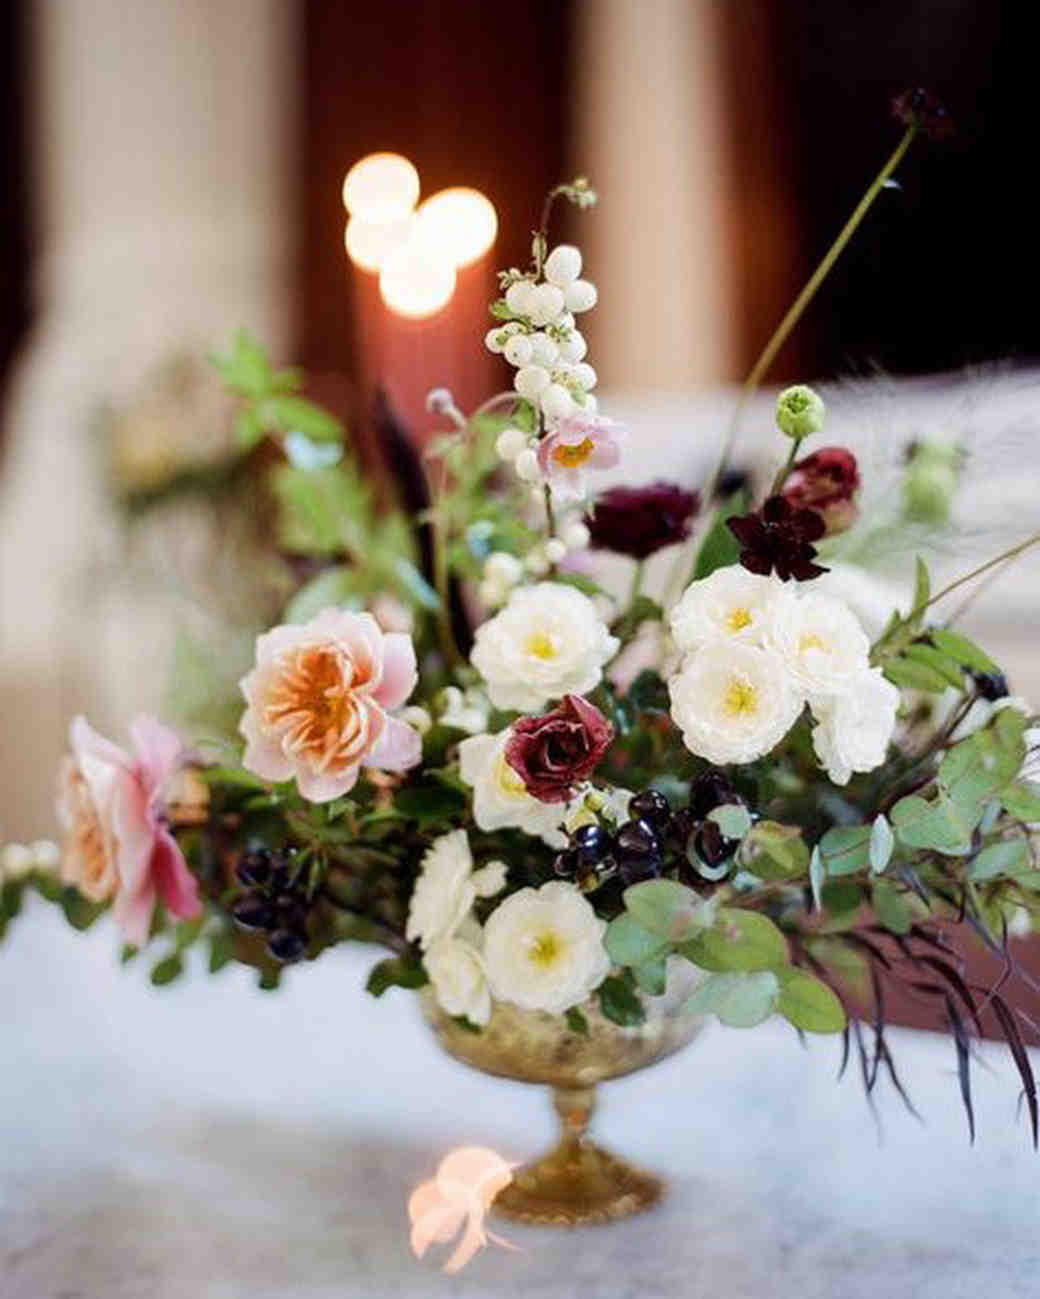 21 Compote Centerpieces That'll Upgrade Your Reception Tables | Martha Stewart Weddings